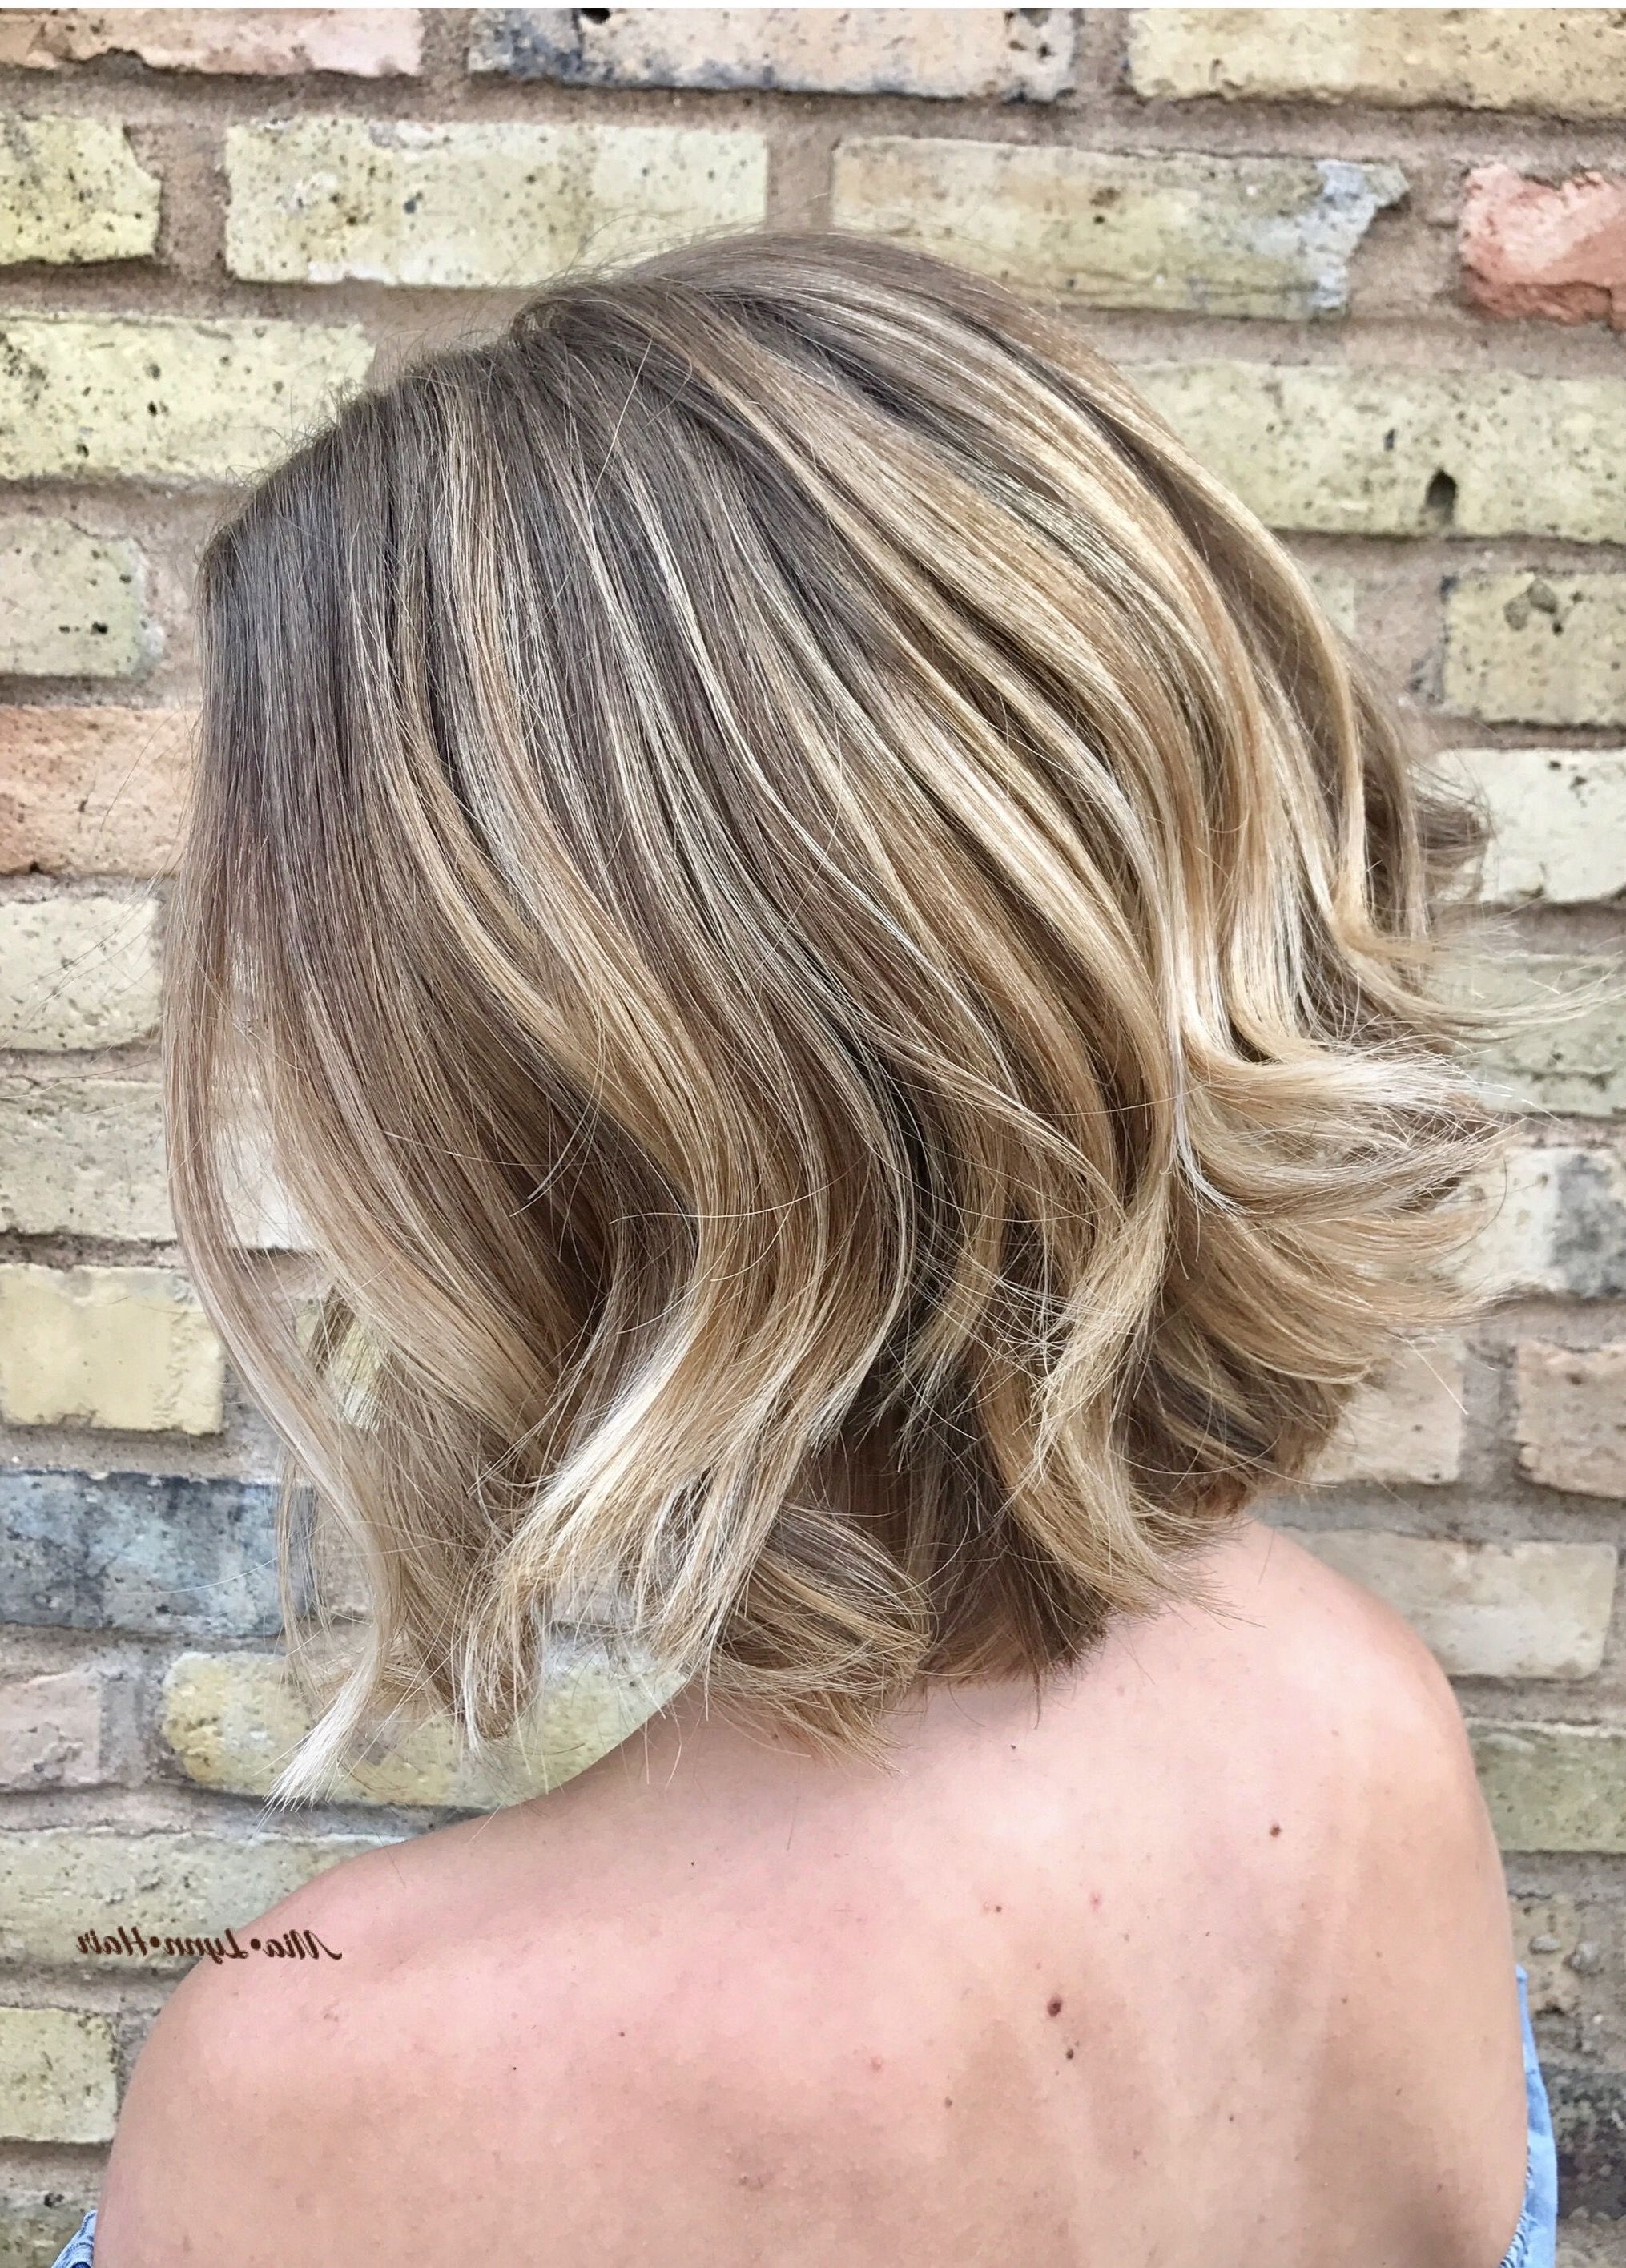 Current Ombre Ed Blonde Lob Hairstyles In Textured Bob, Razor Cut, Lived In Hair, Bob, Lob, Balayage, Blonde (View 9 of 20)